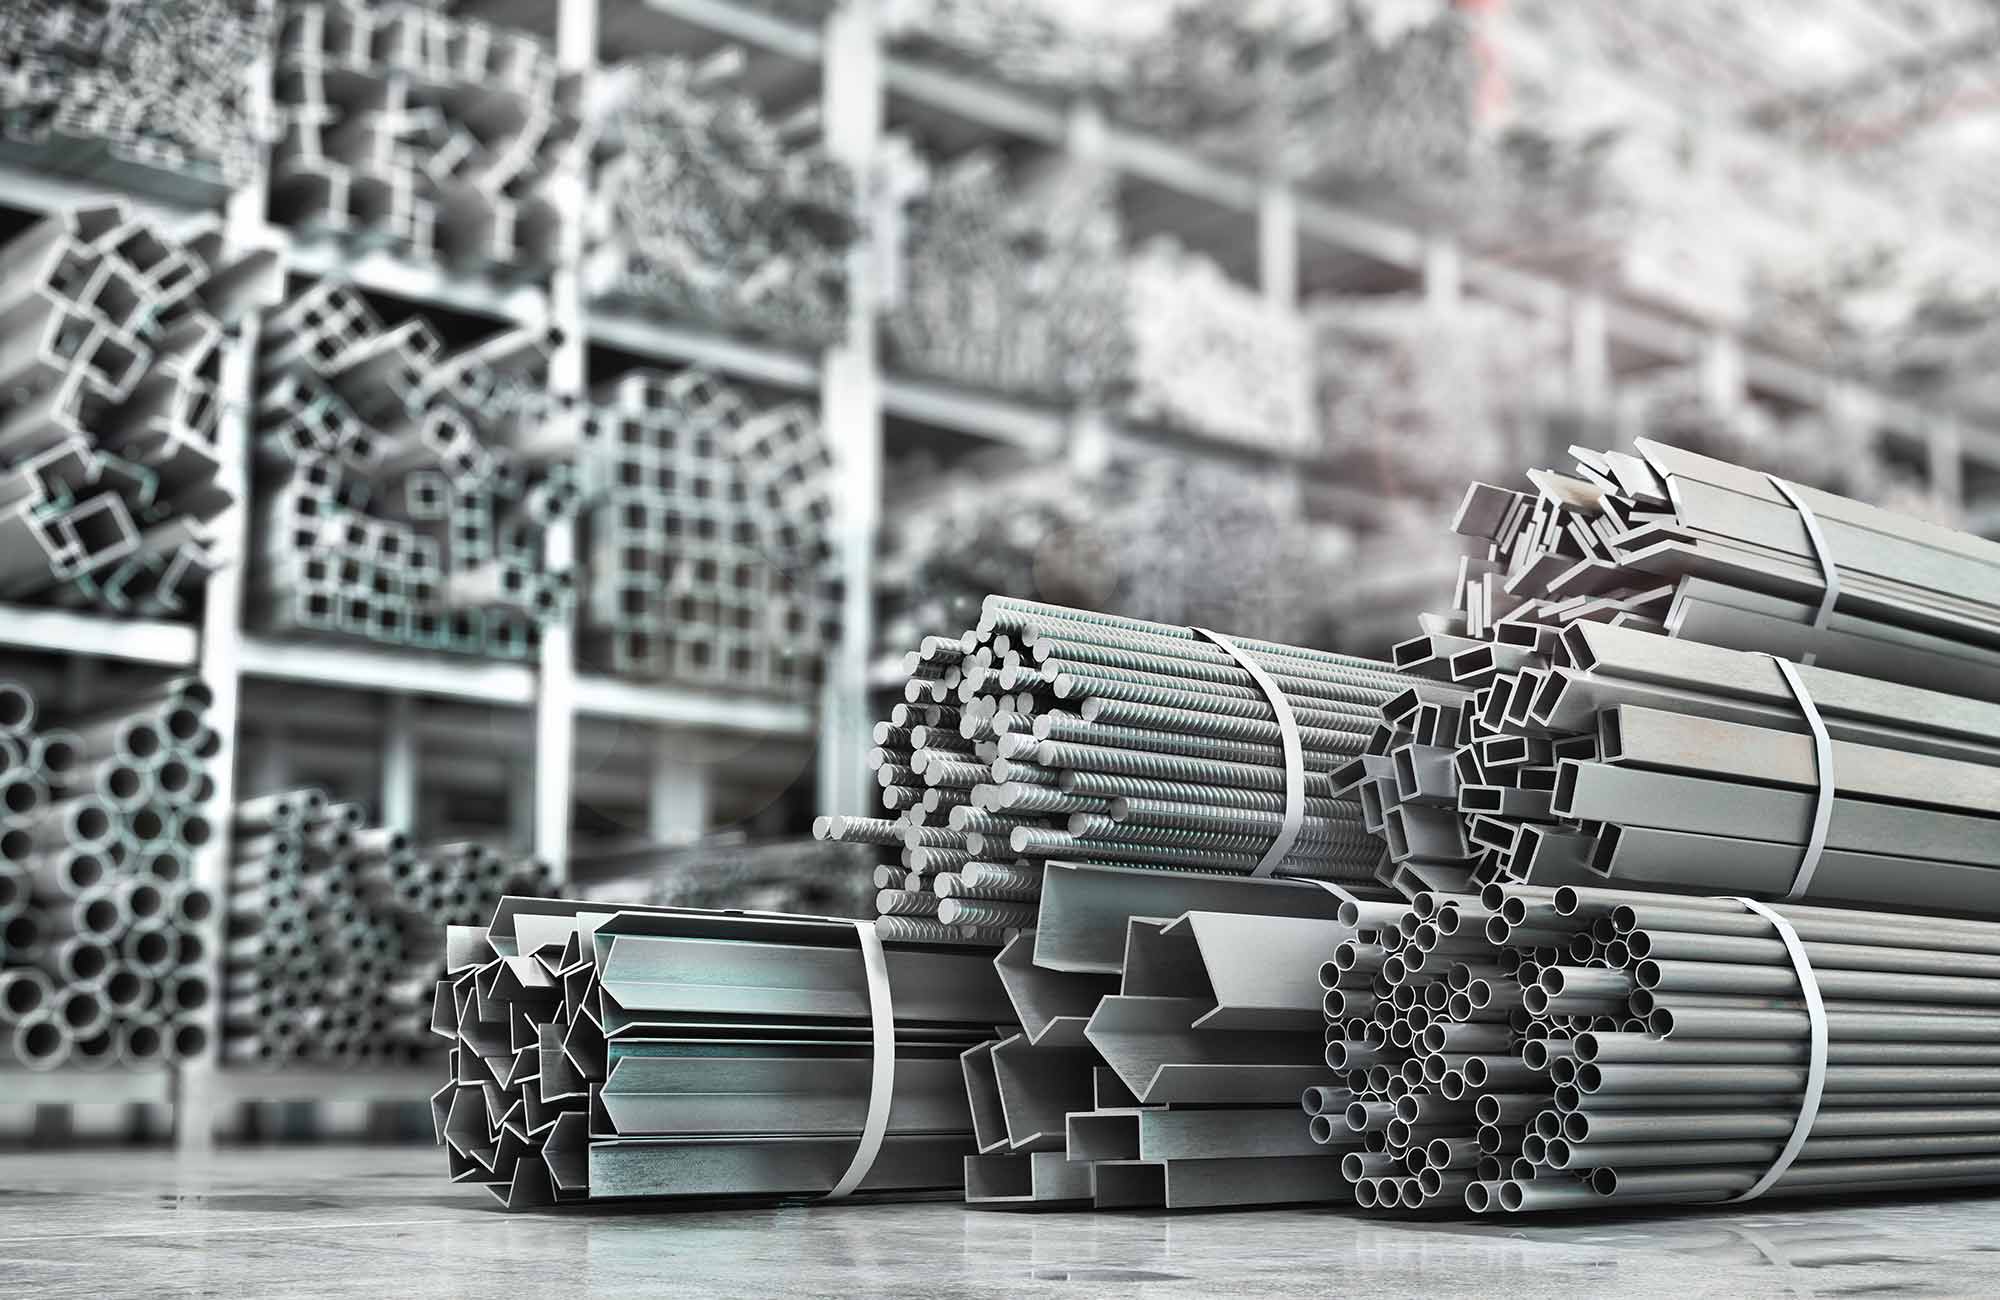 Steel Products Market 2022 Industry Trends, Share, Size, Demand, Growth Opportunities Forecast 2028